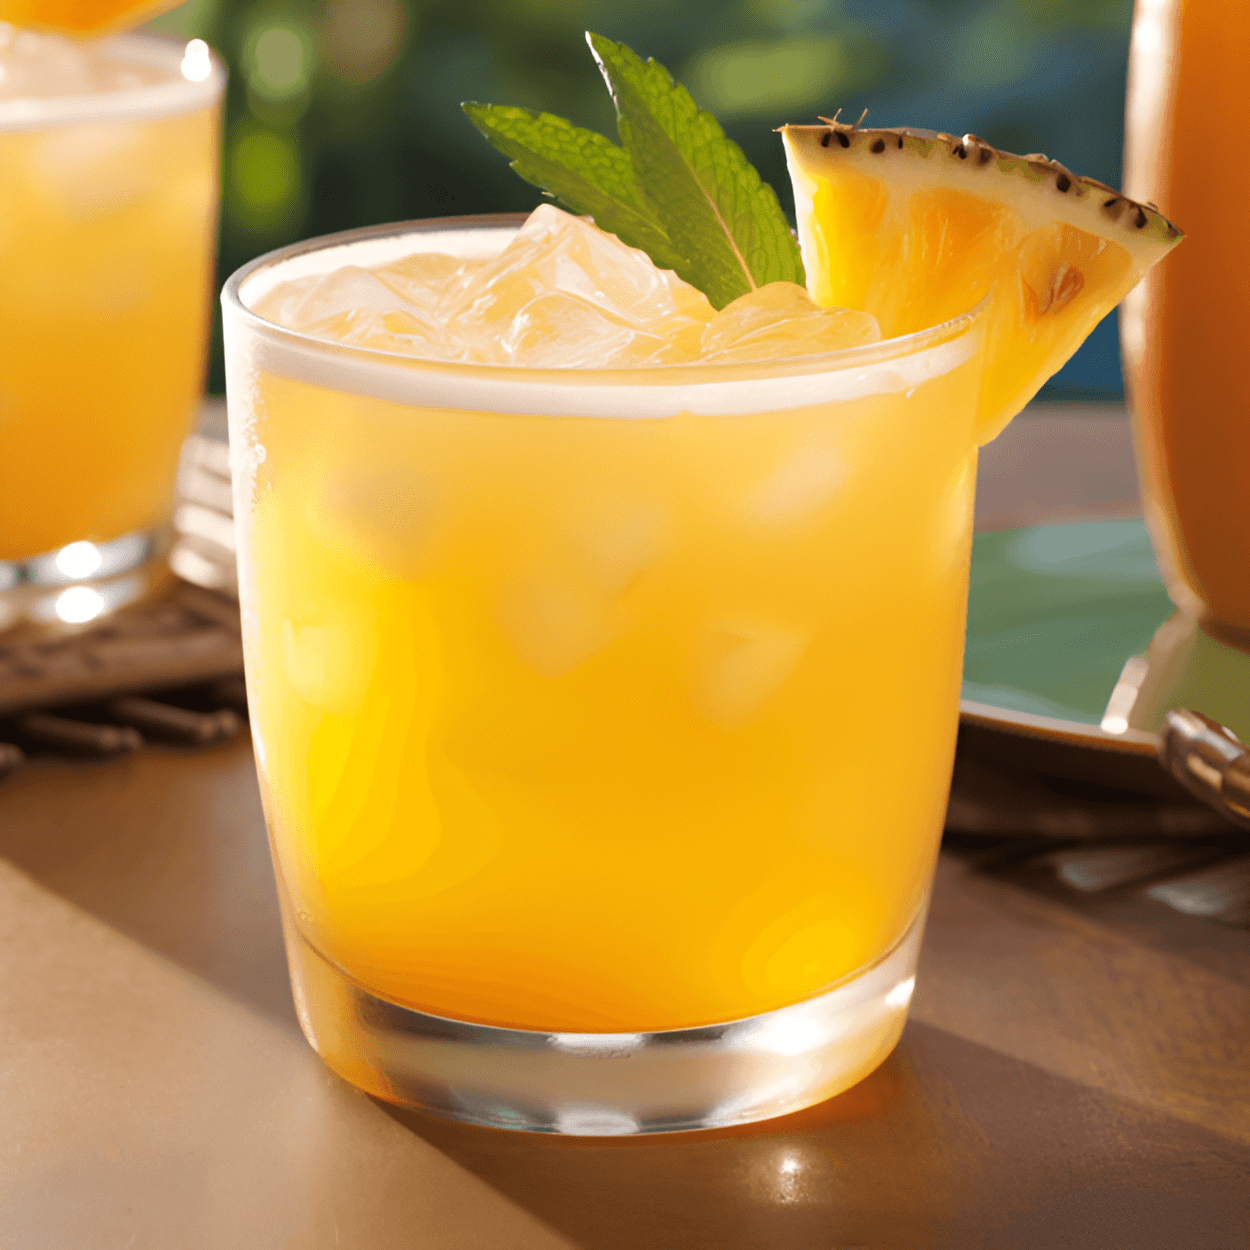 Gator Piss Cocktail Recipe - Gator Piss is a sweet, fruity cocktail with a strong kick. The combination of peach schnapps, pineapple juice, and Southern Comfort gives it a tropical, juicy flavor, while the 151 proof rum adds a potent punch.